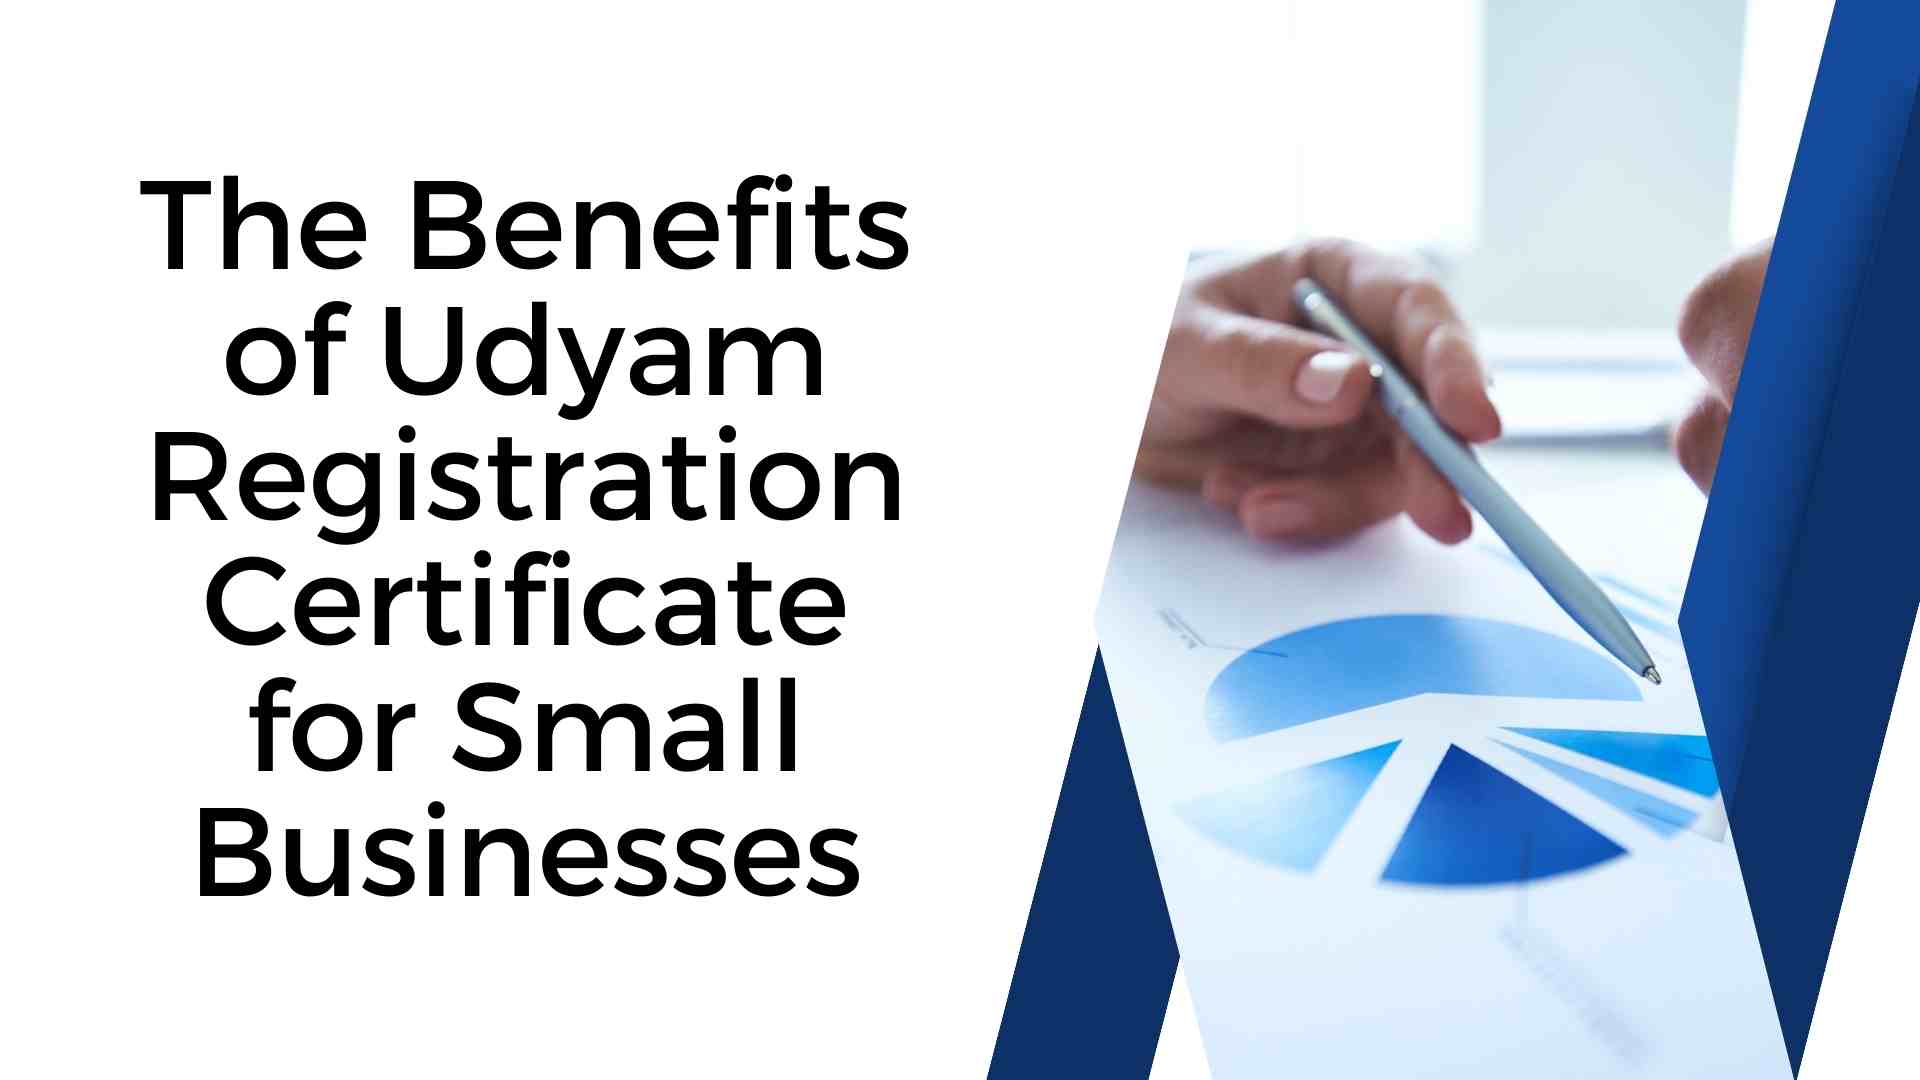 The Benefits of Udyam Registration Certificate for Small Businesses